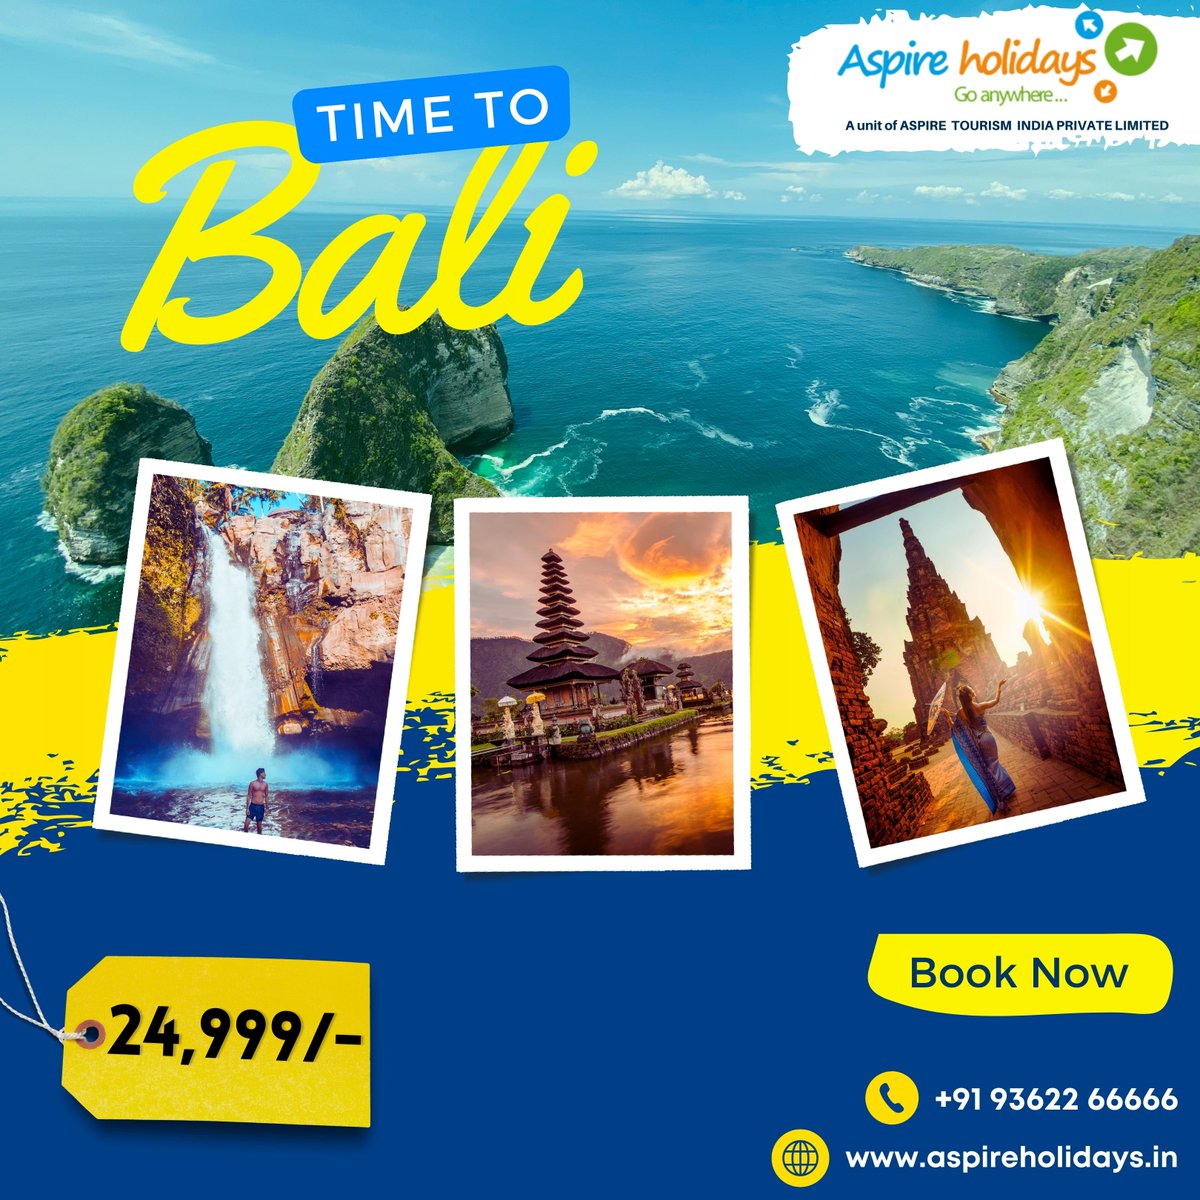 🌴✨ Escape to the enchanting island of Bali! Immerse yourself in the breathtaking beaches, #Bali #TravelGoals #IslandLife 🌊#explore

🌅 Witness the most breathtaking sunsets in Bali, where the sky is painted with hues🌅✨ #BaliSunsets #MagicalMoments #ParadiseFound
#Indonesia